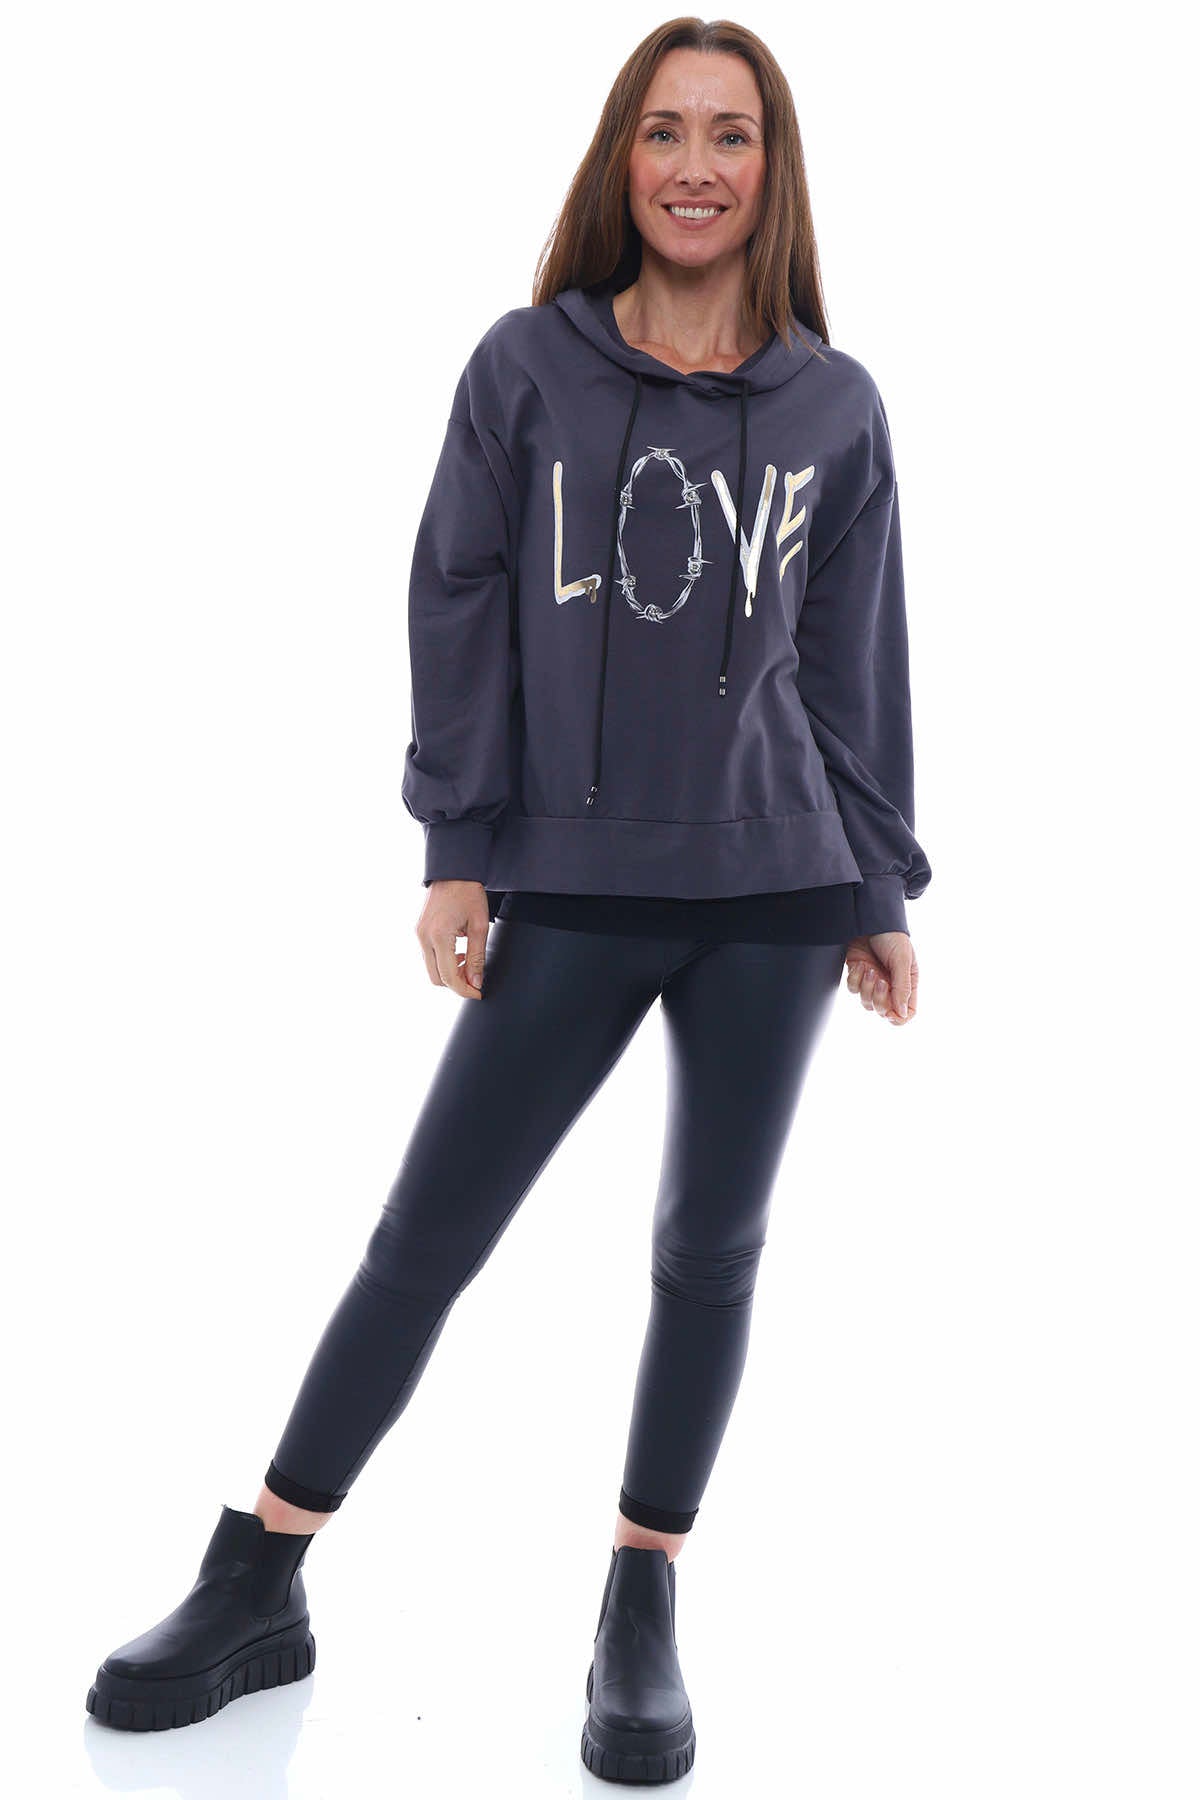 Martha Love Cotton Hooded Top Charcoal